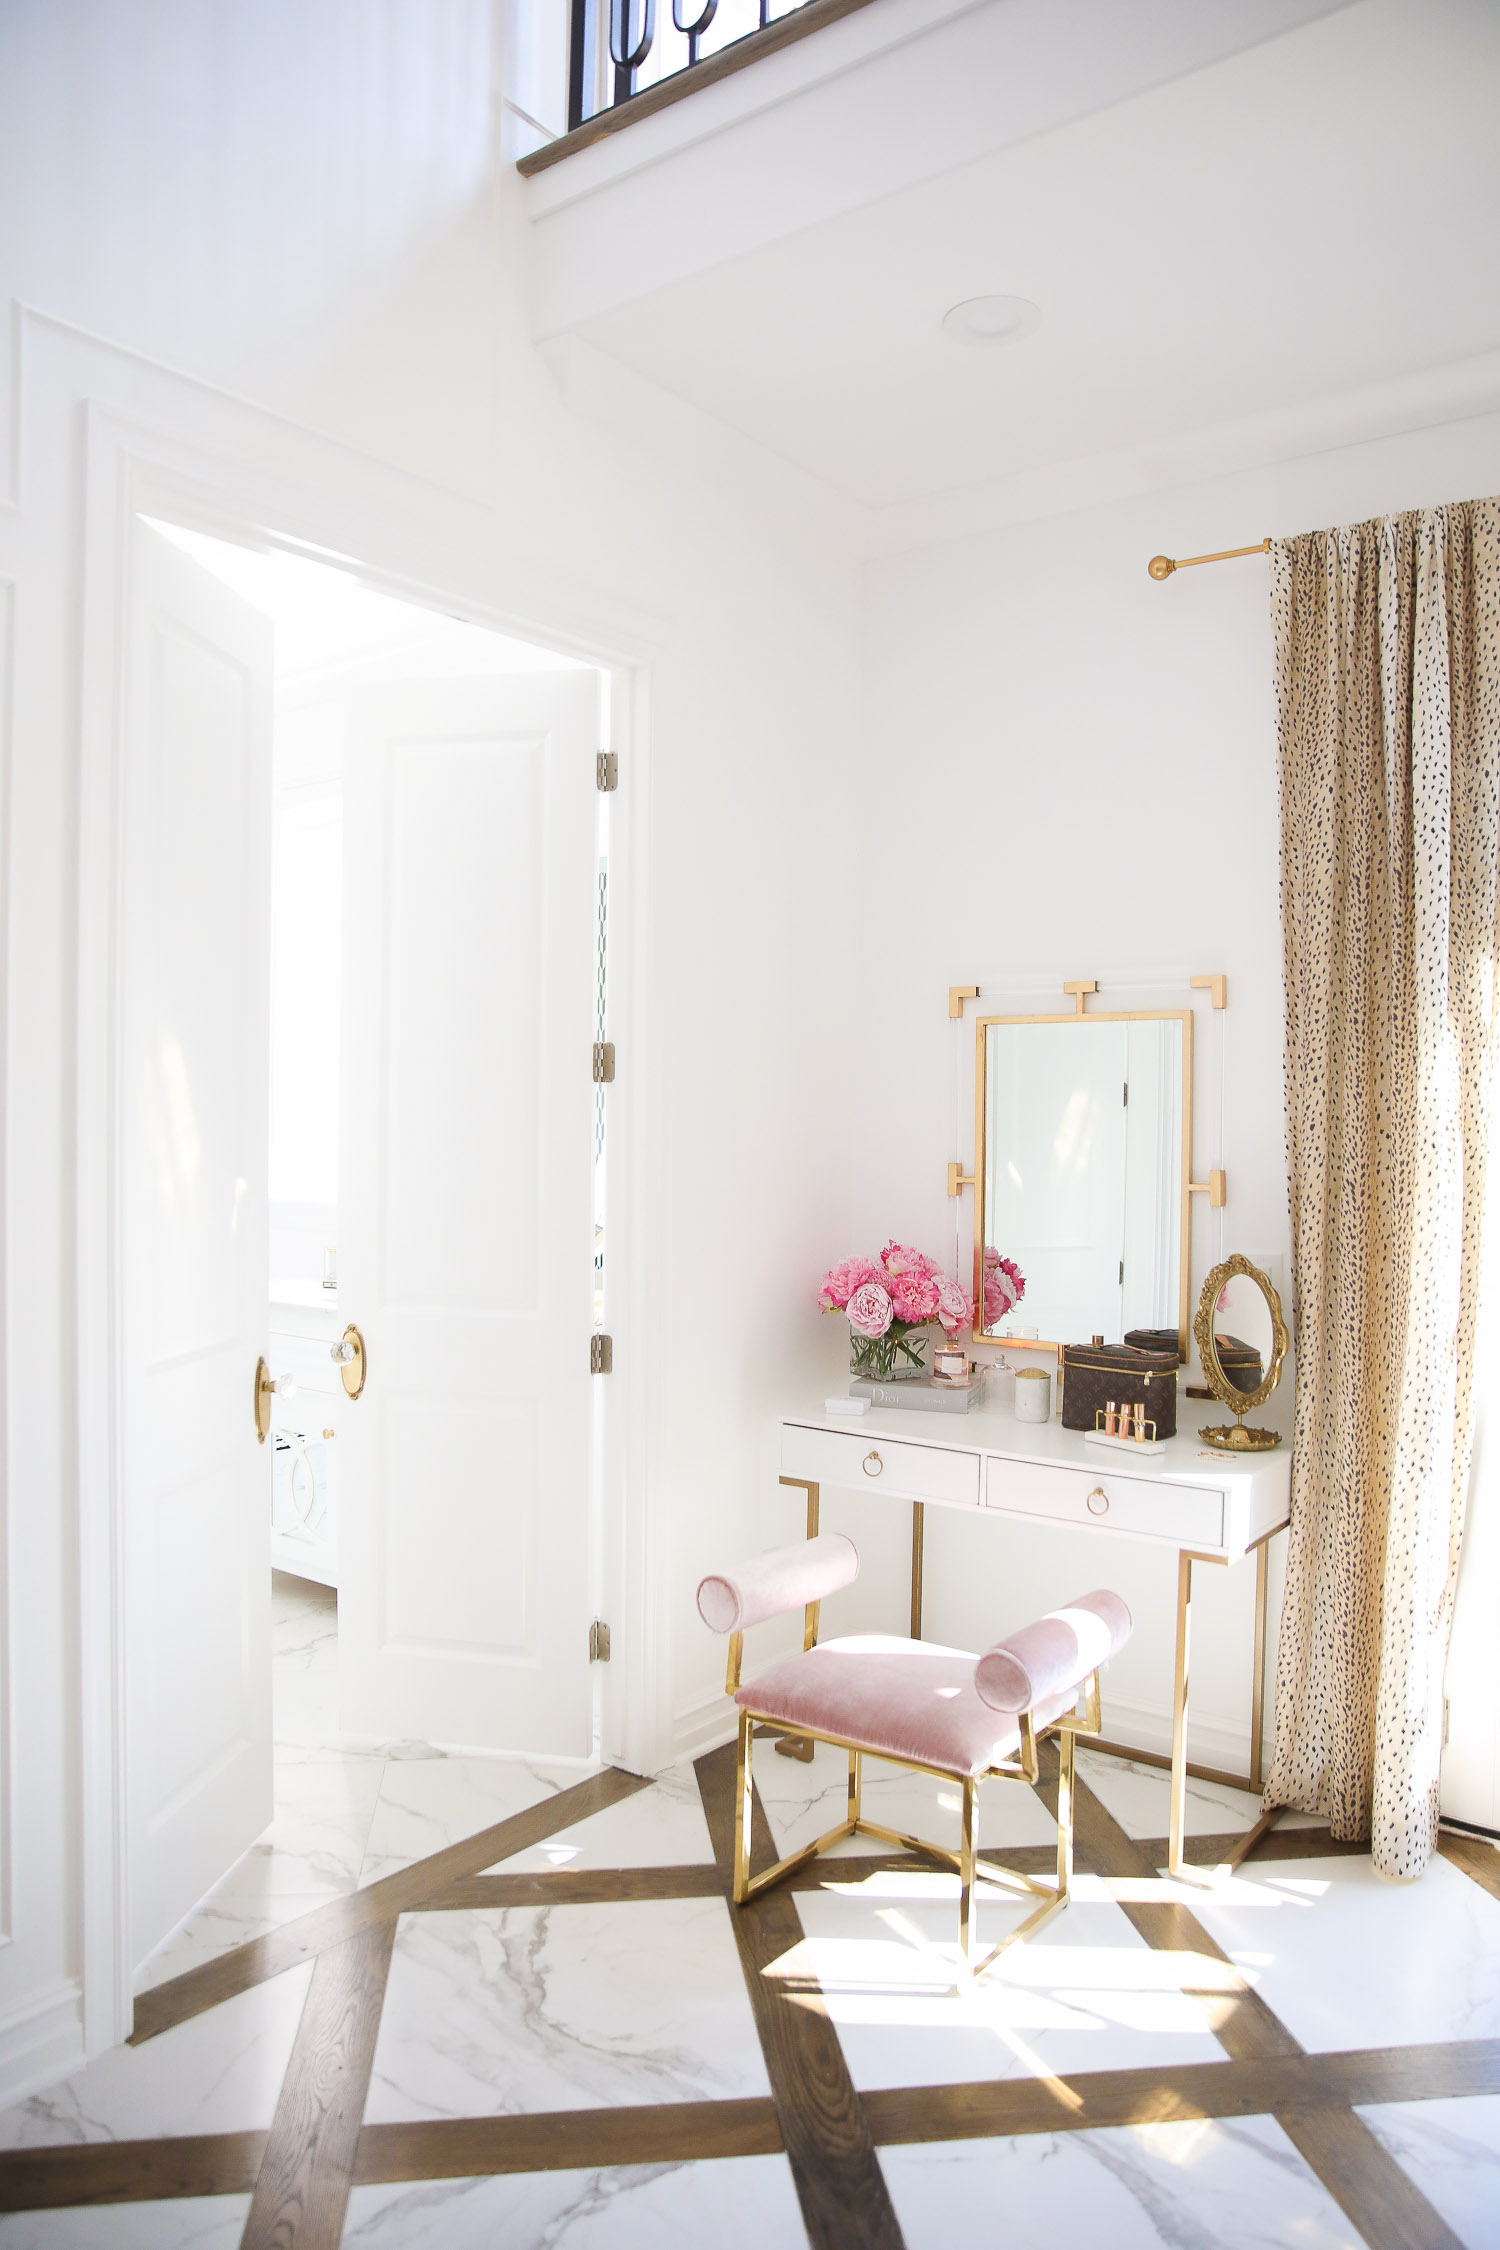 Top Picks by popular US life and style blog, The Sweetest Thing: image of a two story closet with marble and wood flooring, antelope print drapes, gold curtain rod, and a white and gold vanity with a pink velvet bench and gold and acrylic mirror. 